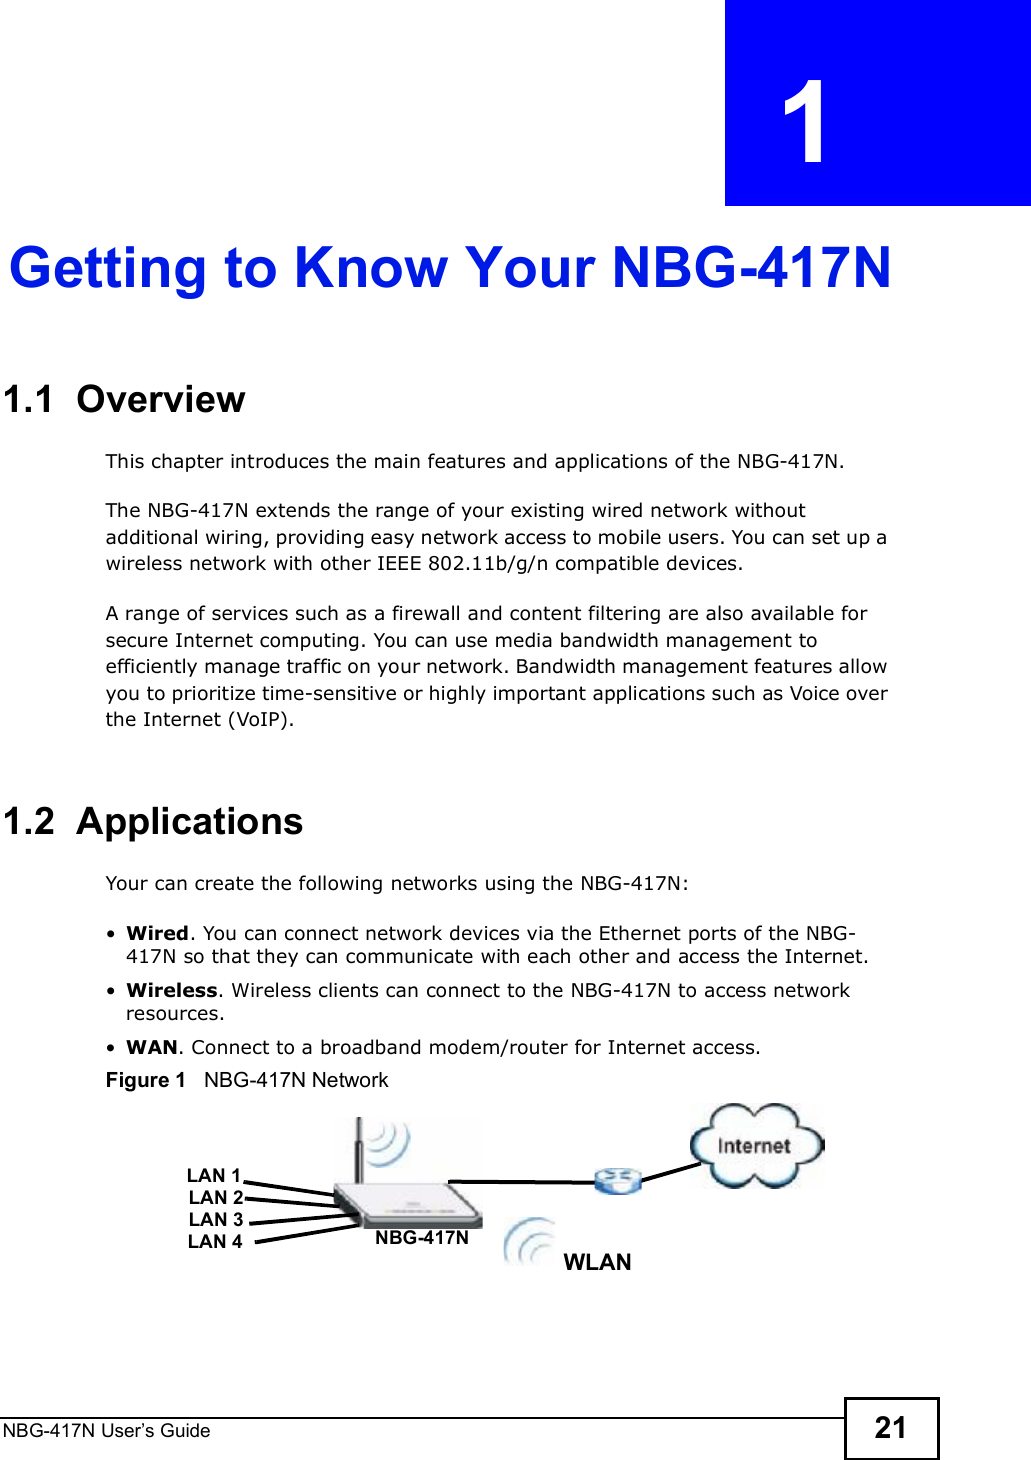 NBG-417N User s Guide 21CHAPTER  1 Getting to Know Your NBG-417N1.1  OverviewThis chapter introduces the main features and applications of the NBG-417N.The NBG-417N extends the range of your existing wired network without additional wiring, providing easy network access to mobile users. You can set up a wireless network with other IEEE 802.11b/g/n compatible devices.A range of services such as a firewall and content filtering are also available for secure Internet computing. You can use media bandwidth management to efficiently manage traffic on your network. Bandwidth management features allow you to prioritize time-sensitive or highly important applications such as Voice over the Internet (VoIP). 1.2  ApplicationsYour can create the following networks using the NBG-417N: Wired. You can connect network devices via the Ethernet ports of the NBG-417N so that they can communicate with each other and access the Internet. Wireless. Wireless clients can connect to the NBG-417N to access network resources. WAN. Connect to a broadband modem/router for Internet access. Figure 1   NBG-417N NetworkWLANLAN 1LAN 2LAN 3 NBG-417NLAN 4